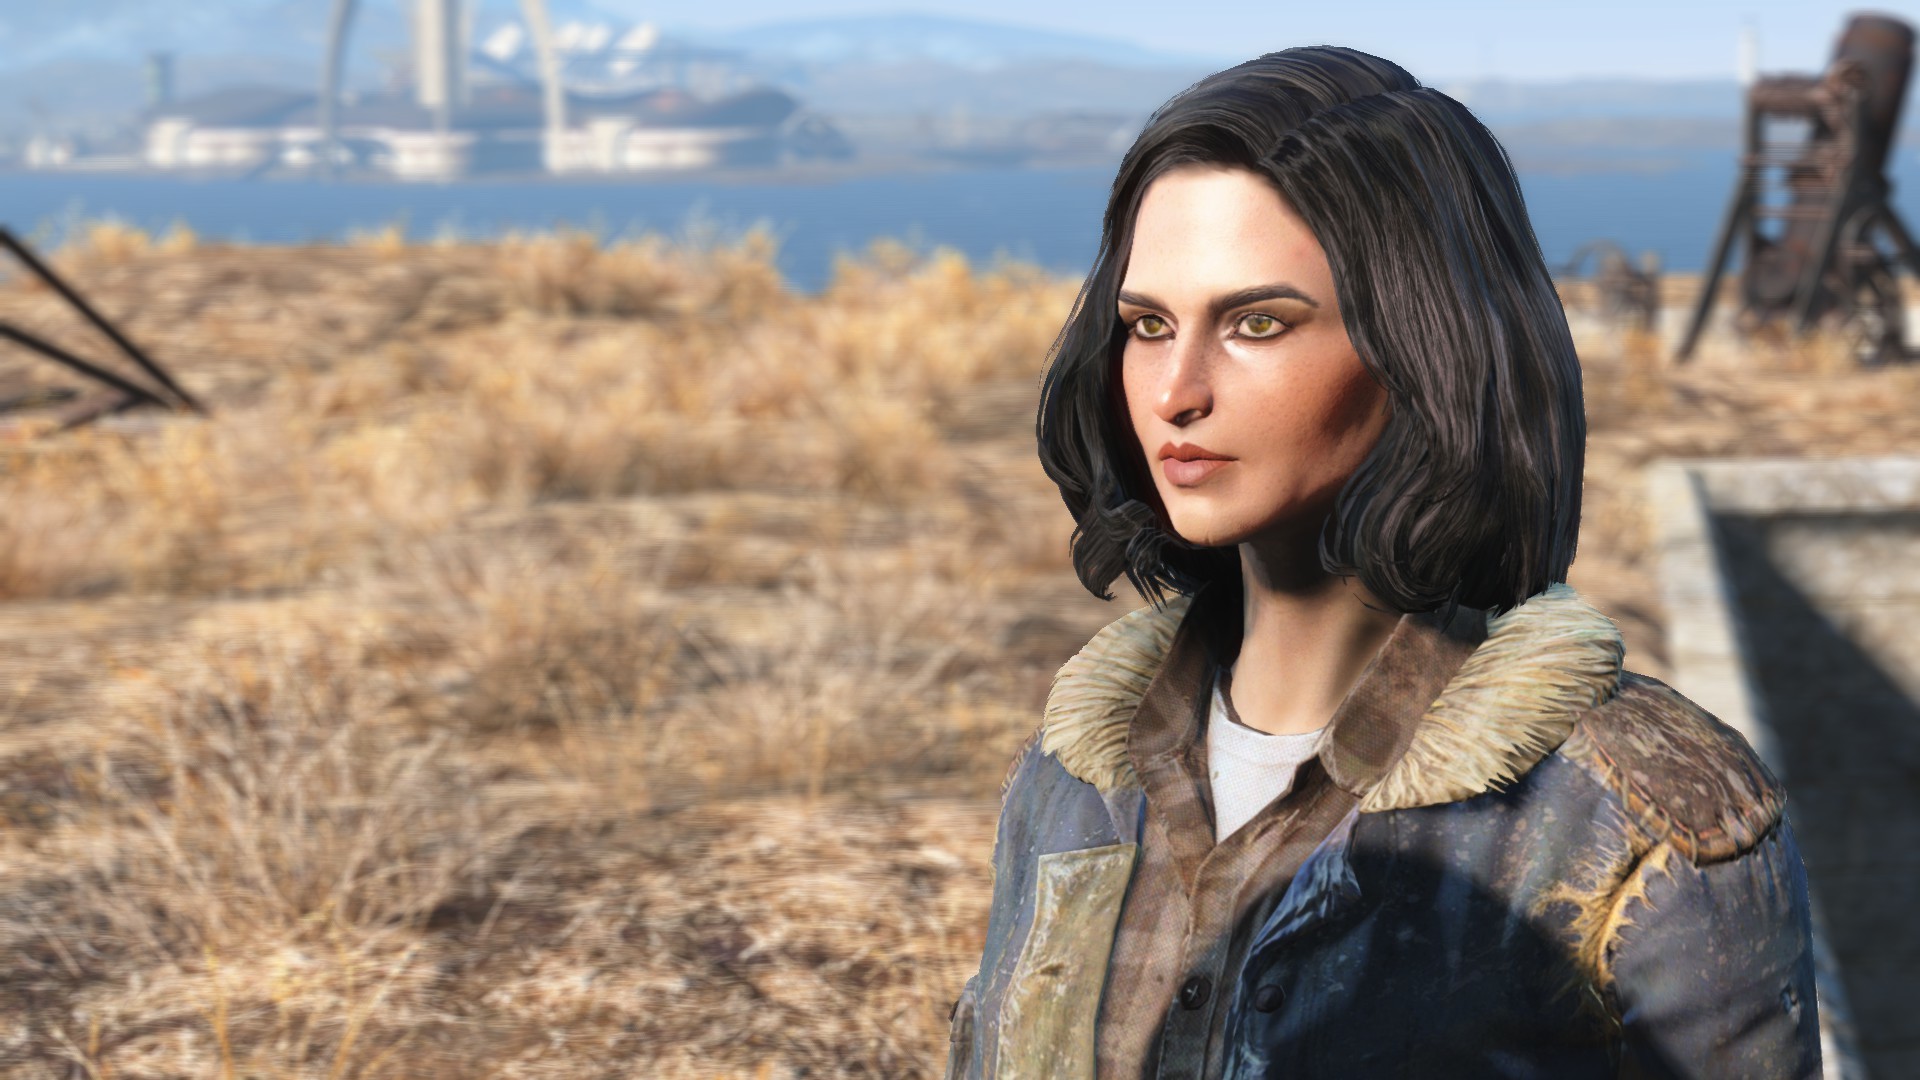 1920x1080 Fallout 4 Piper Related Keywords & Suggestions - Fallout 4 .